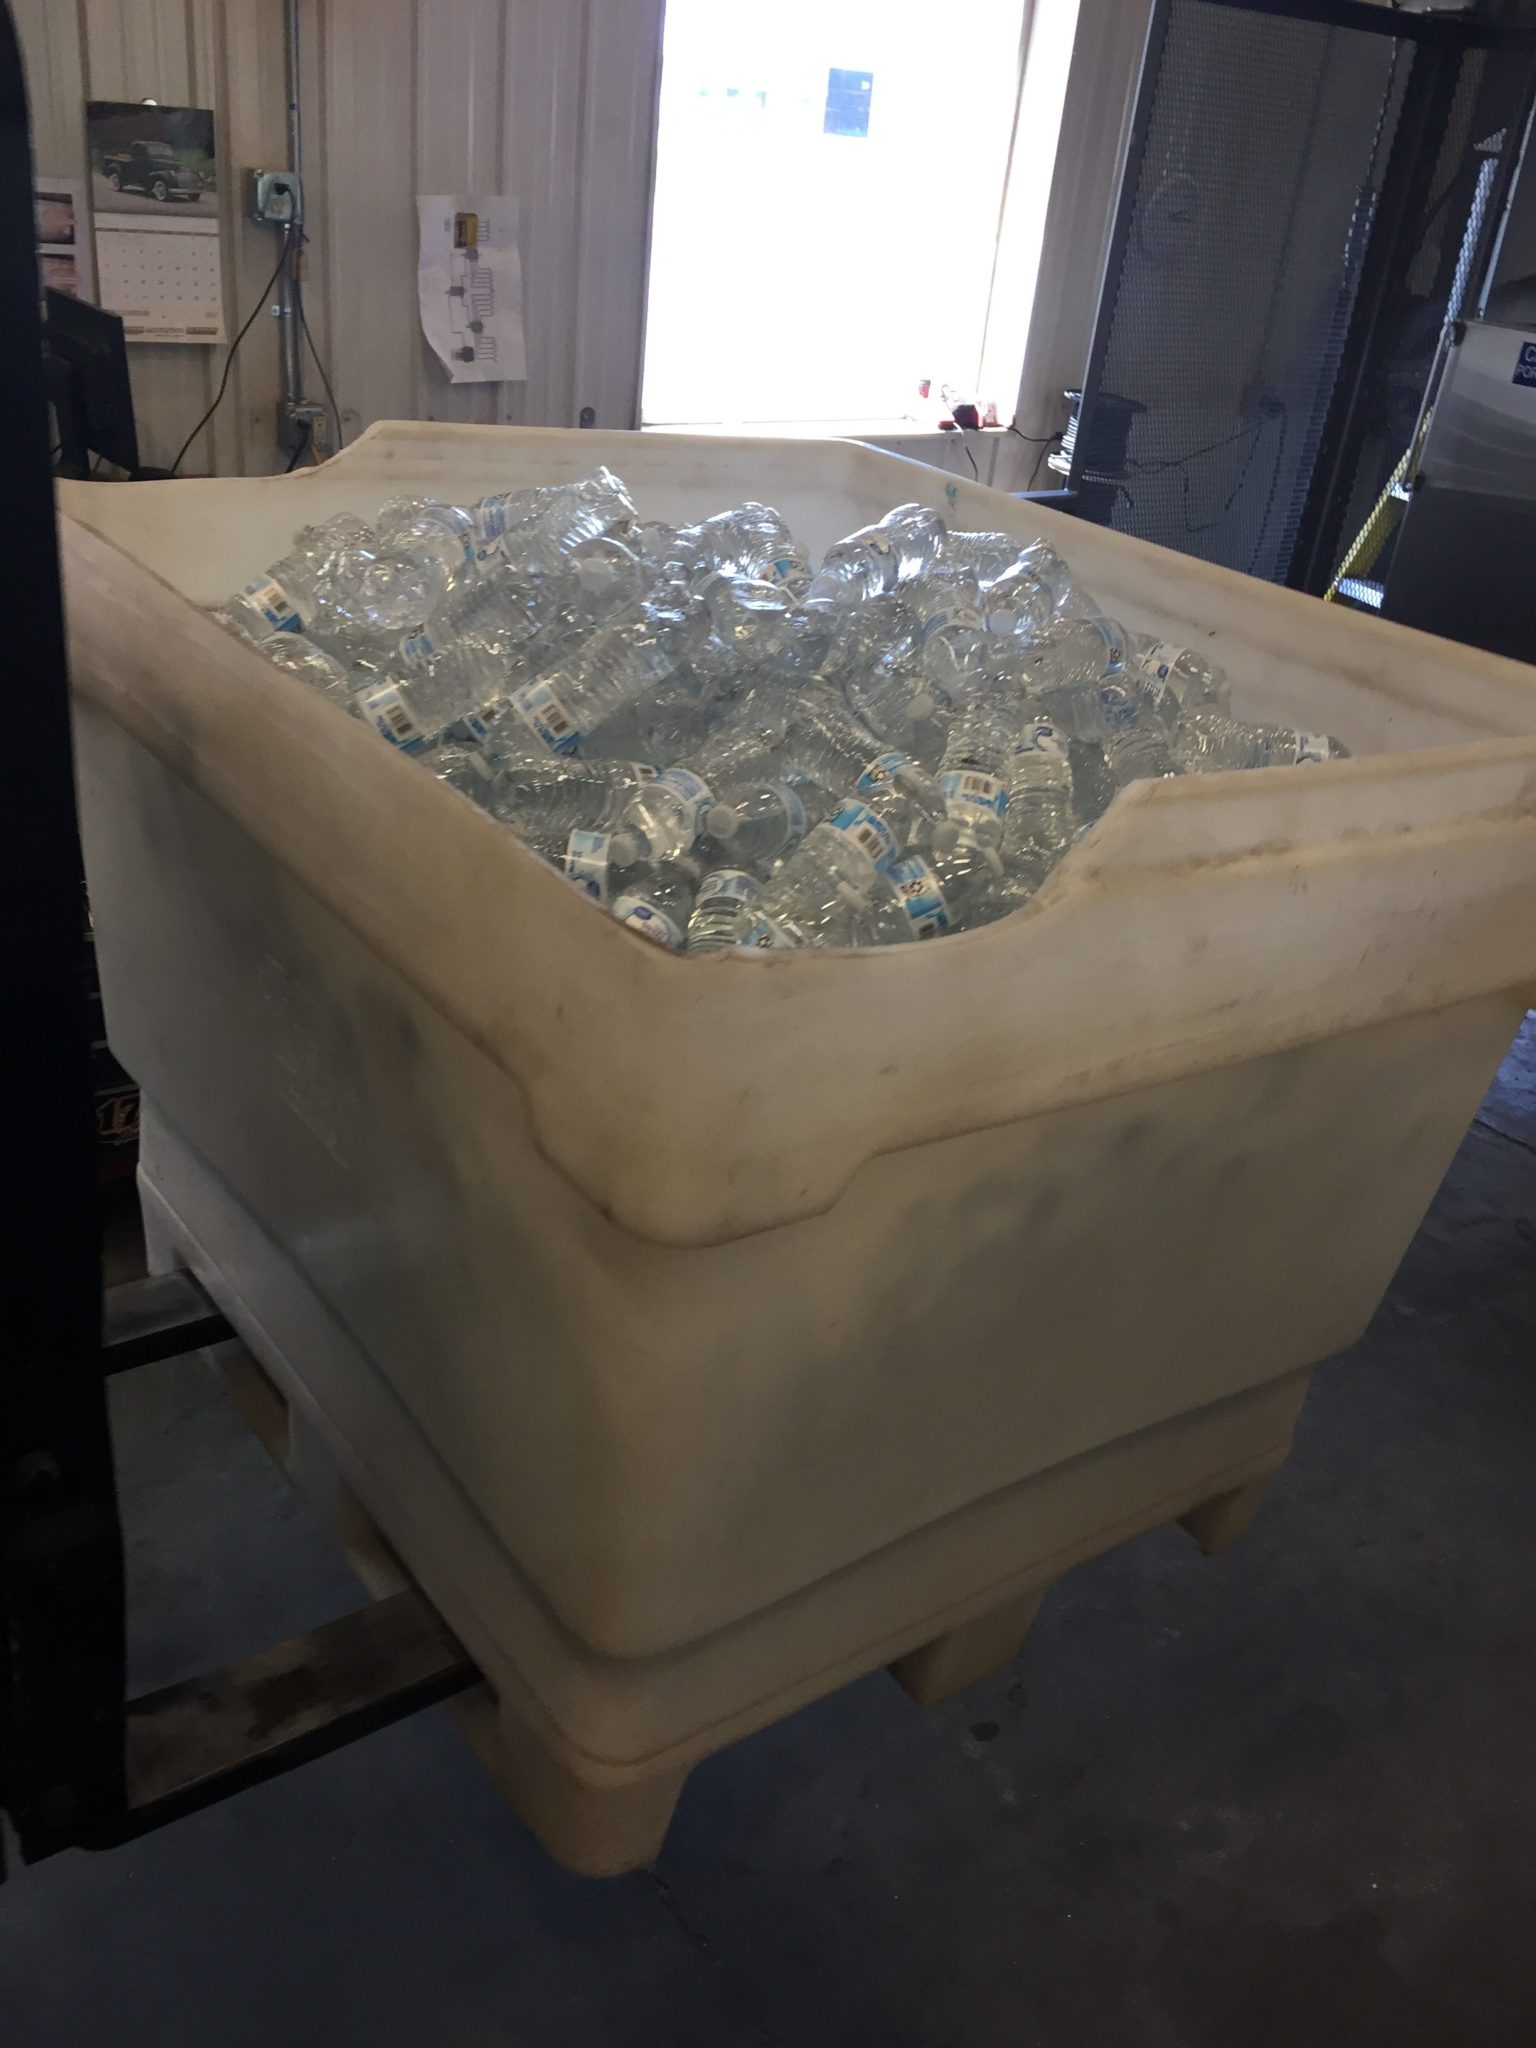 Part of Harmony's quality control testing includes running full totes of product through our beverage extraction balers